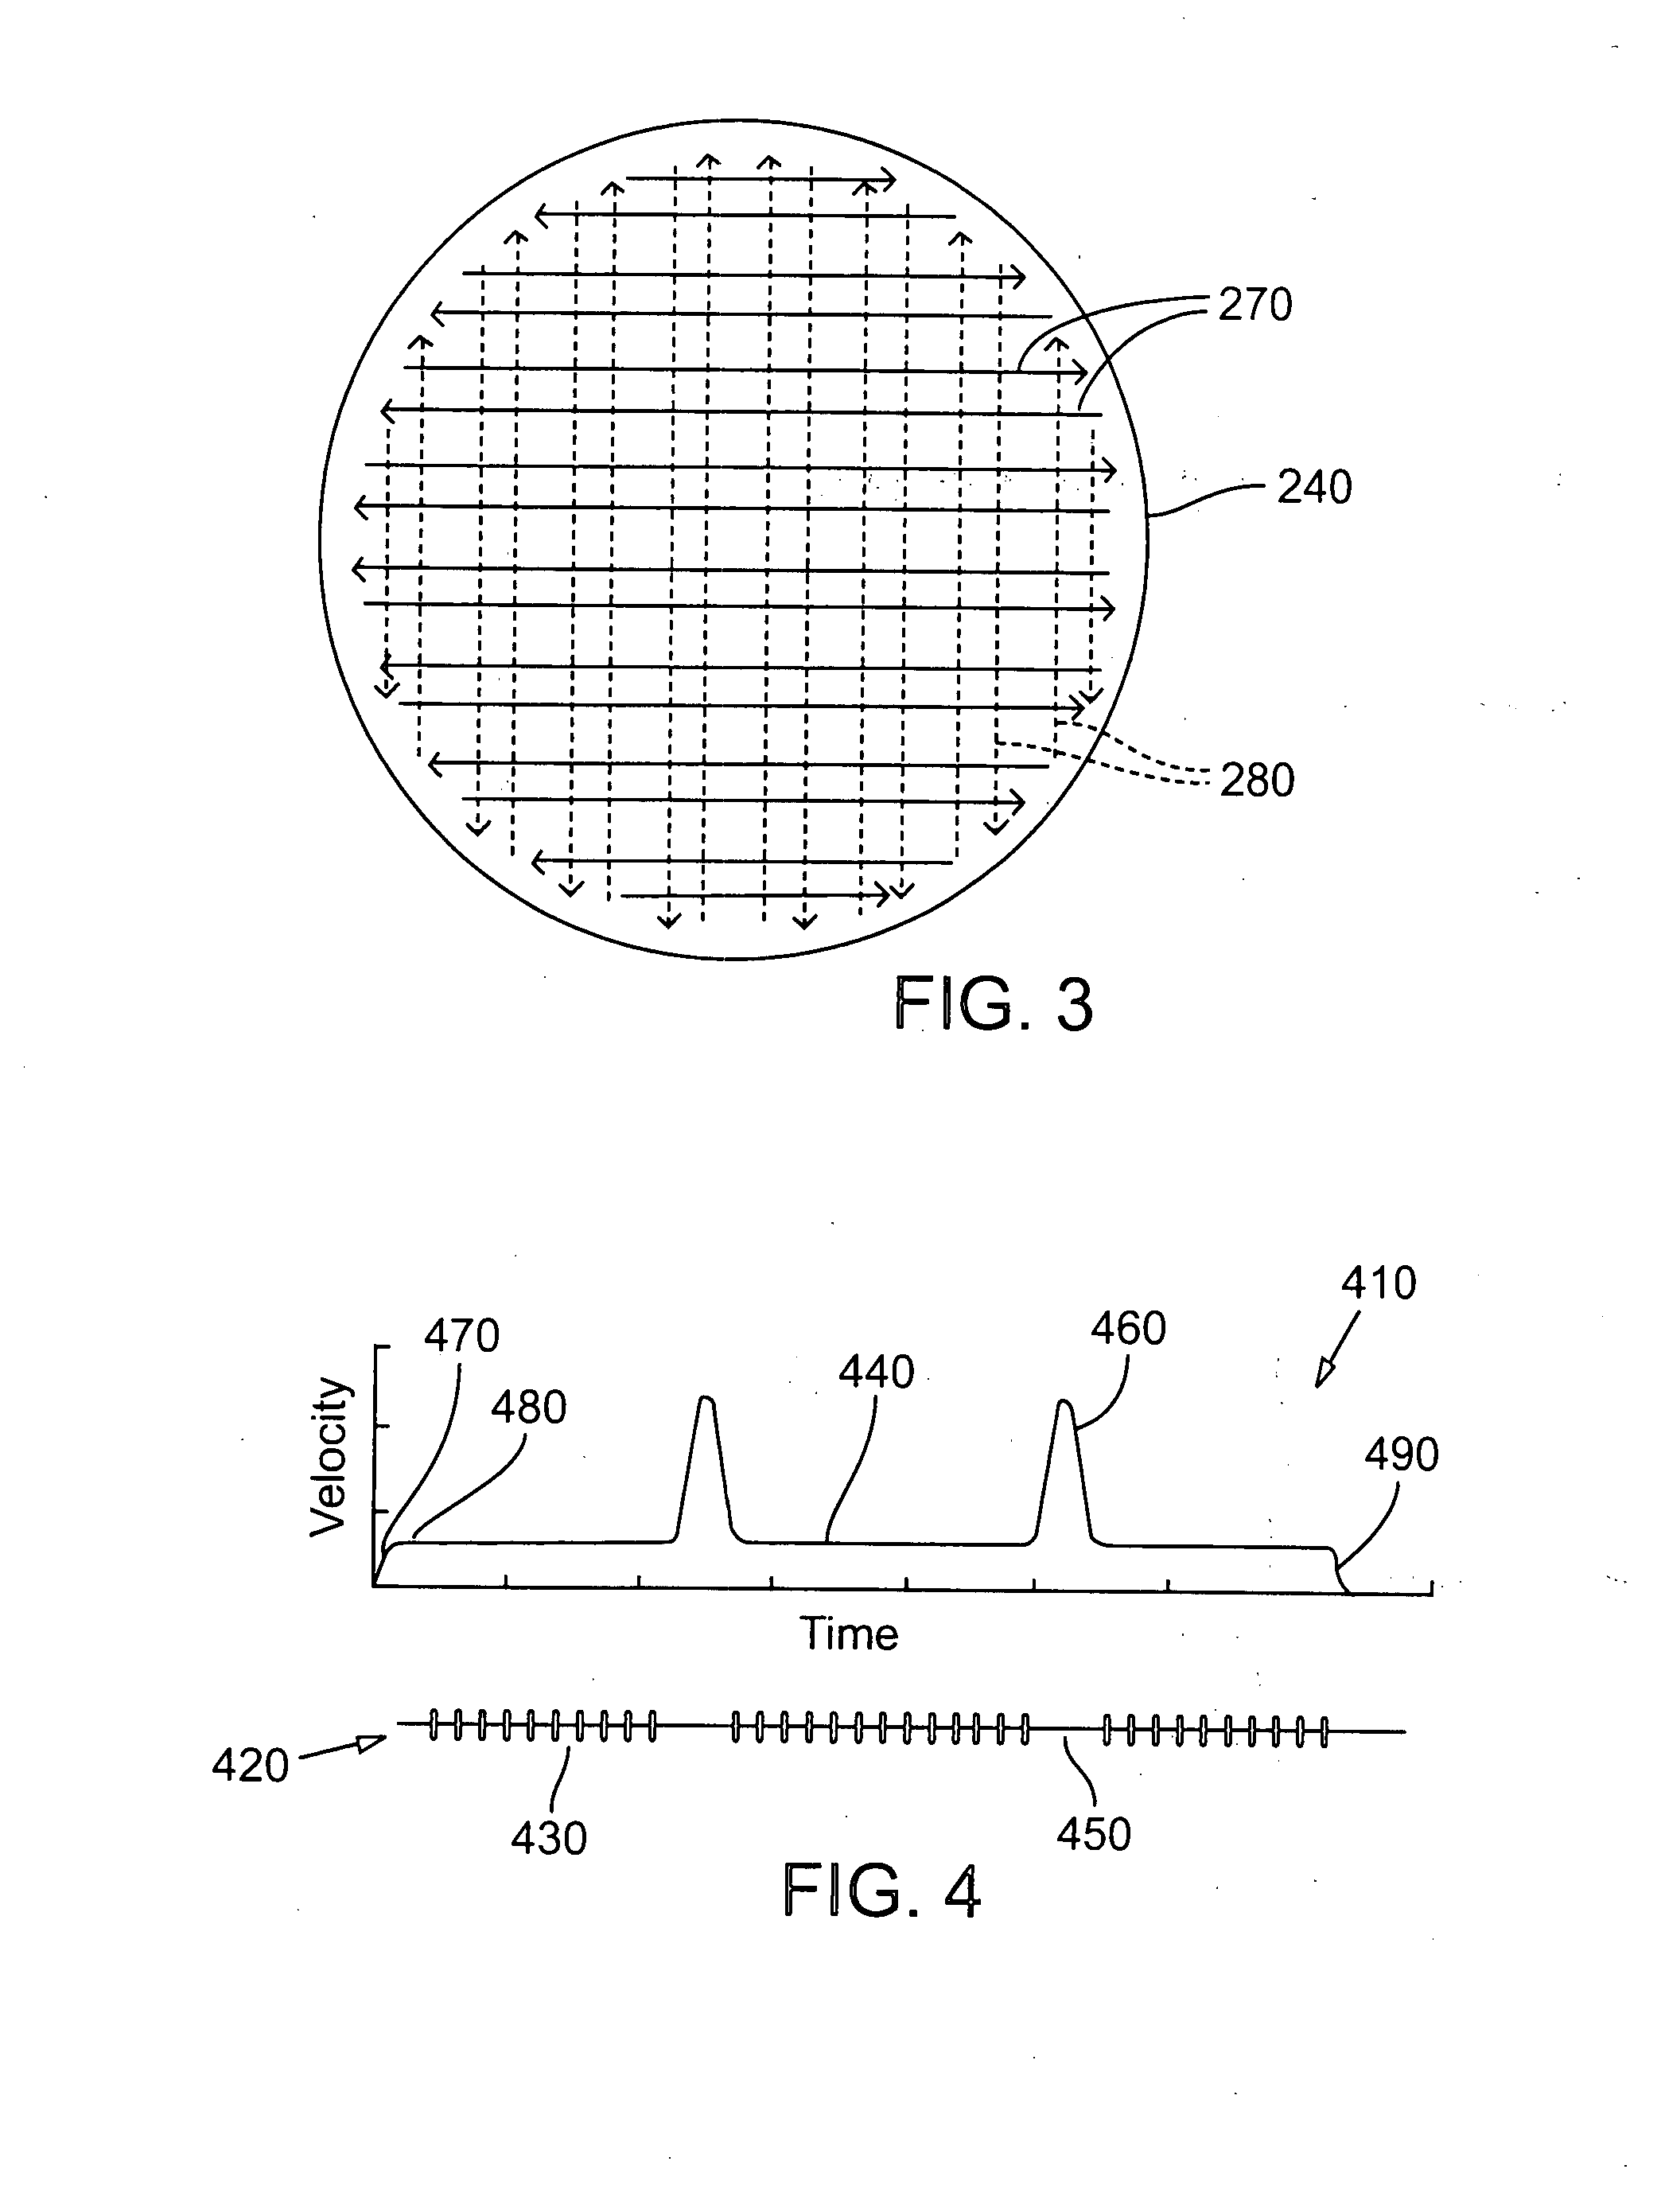 Methods and systems for semiconductor structure processing using multiple laser beam spots